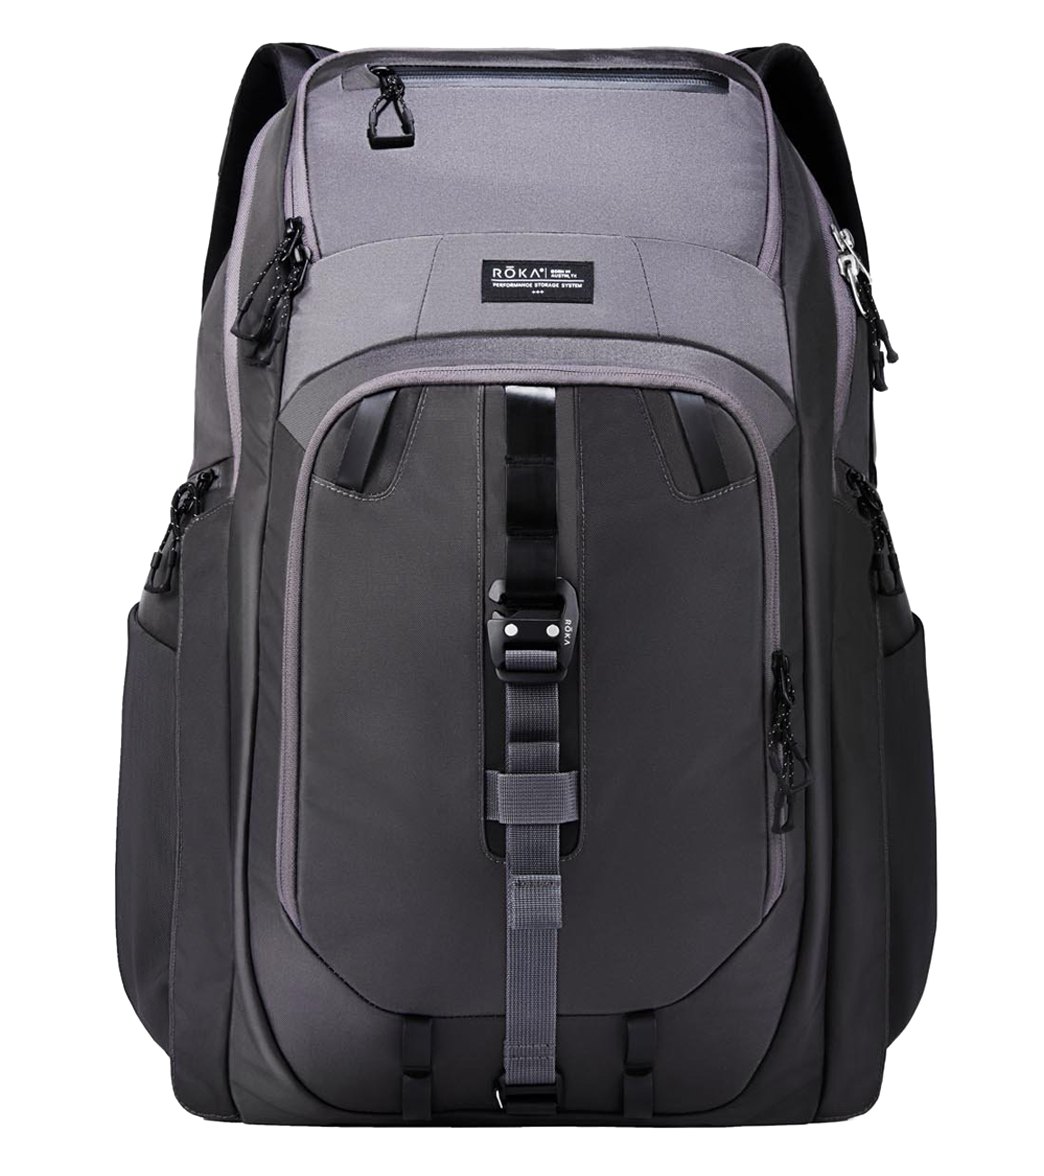 ROKA Transition Backpack at SwimOutlet.com - Free Shipping